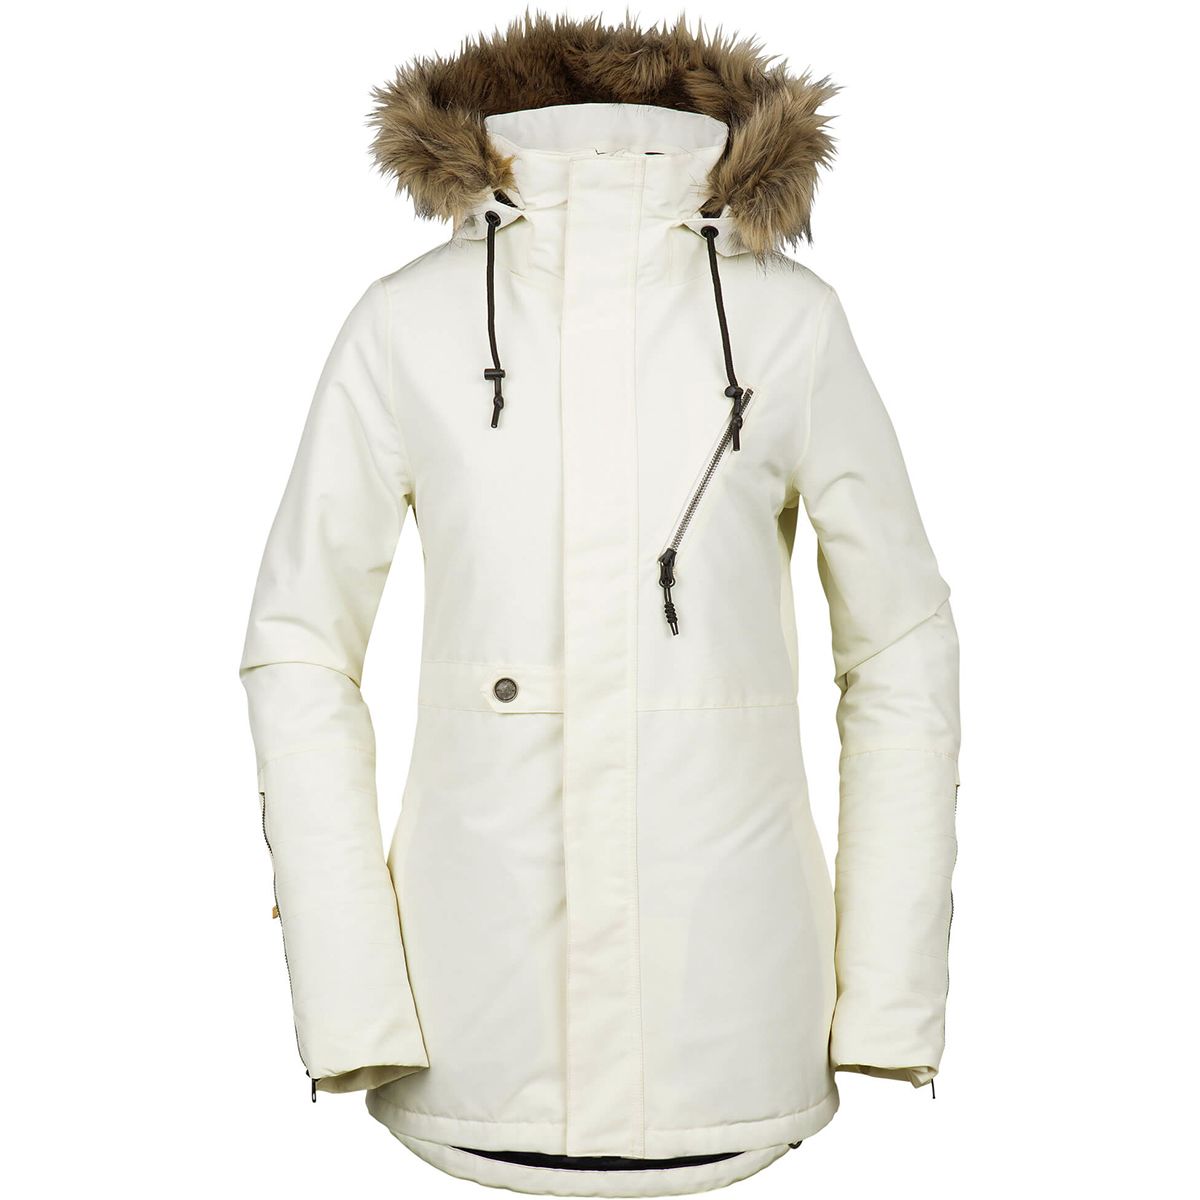 Fawn Insulated Jacket - Women